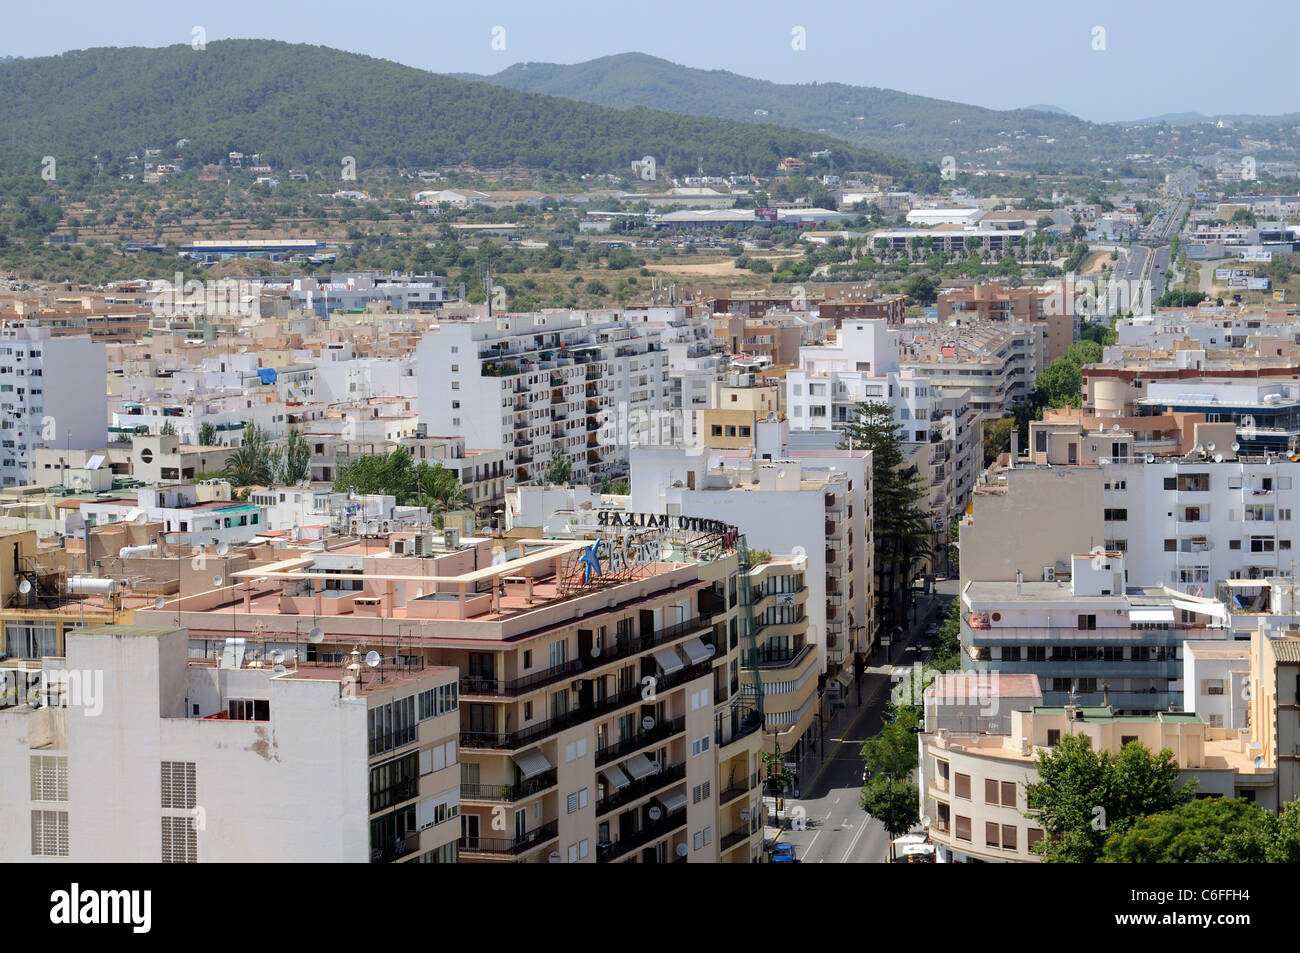 Overview of Eivissa town looking north island of Ibiza A Spanish historic port and town Stock Photo